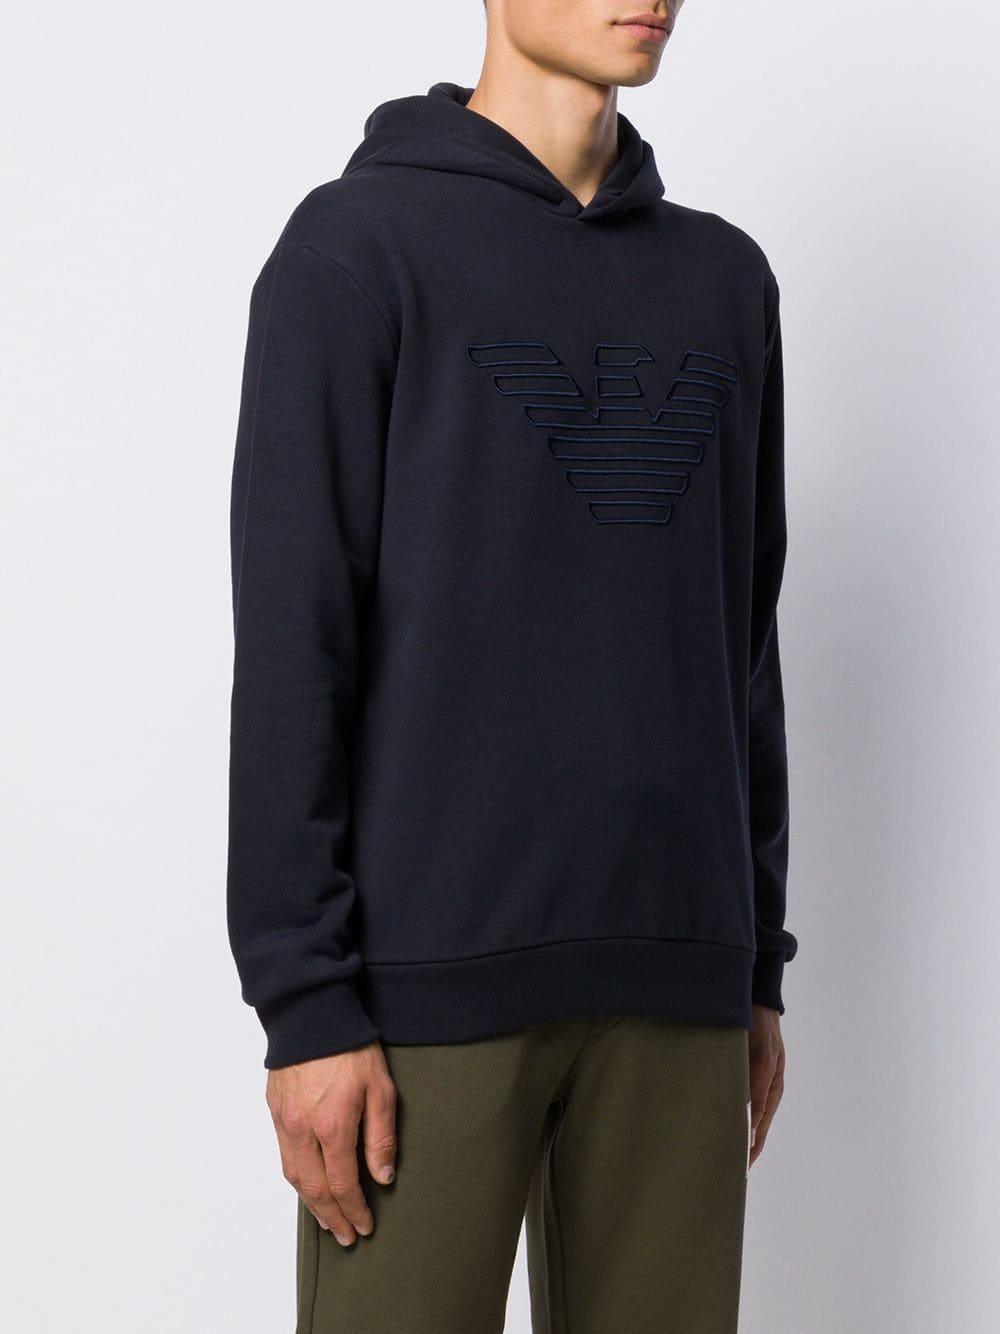 Emporio Armani Eagle Embroidered Hoodie in Blue (Black) for Men 